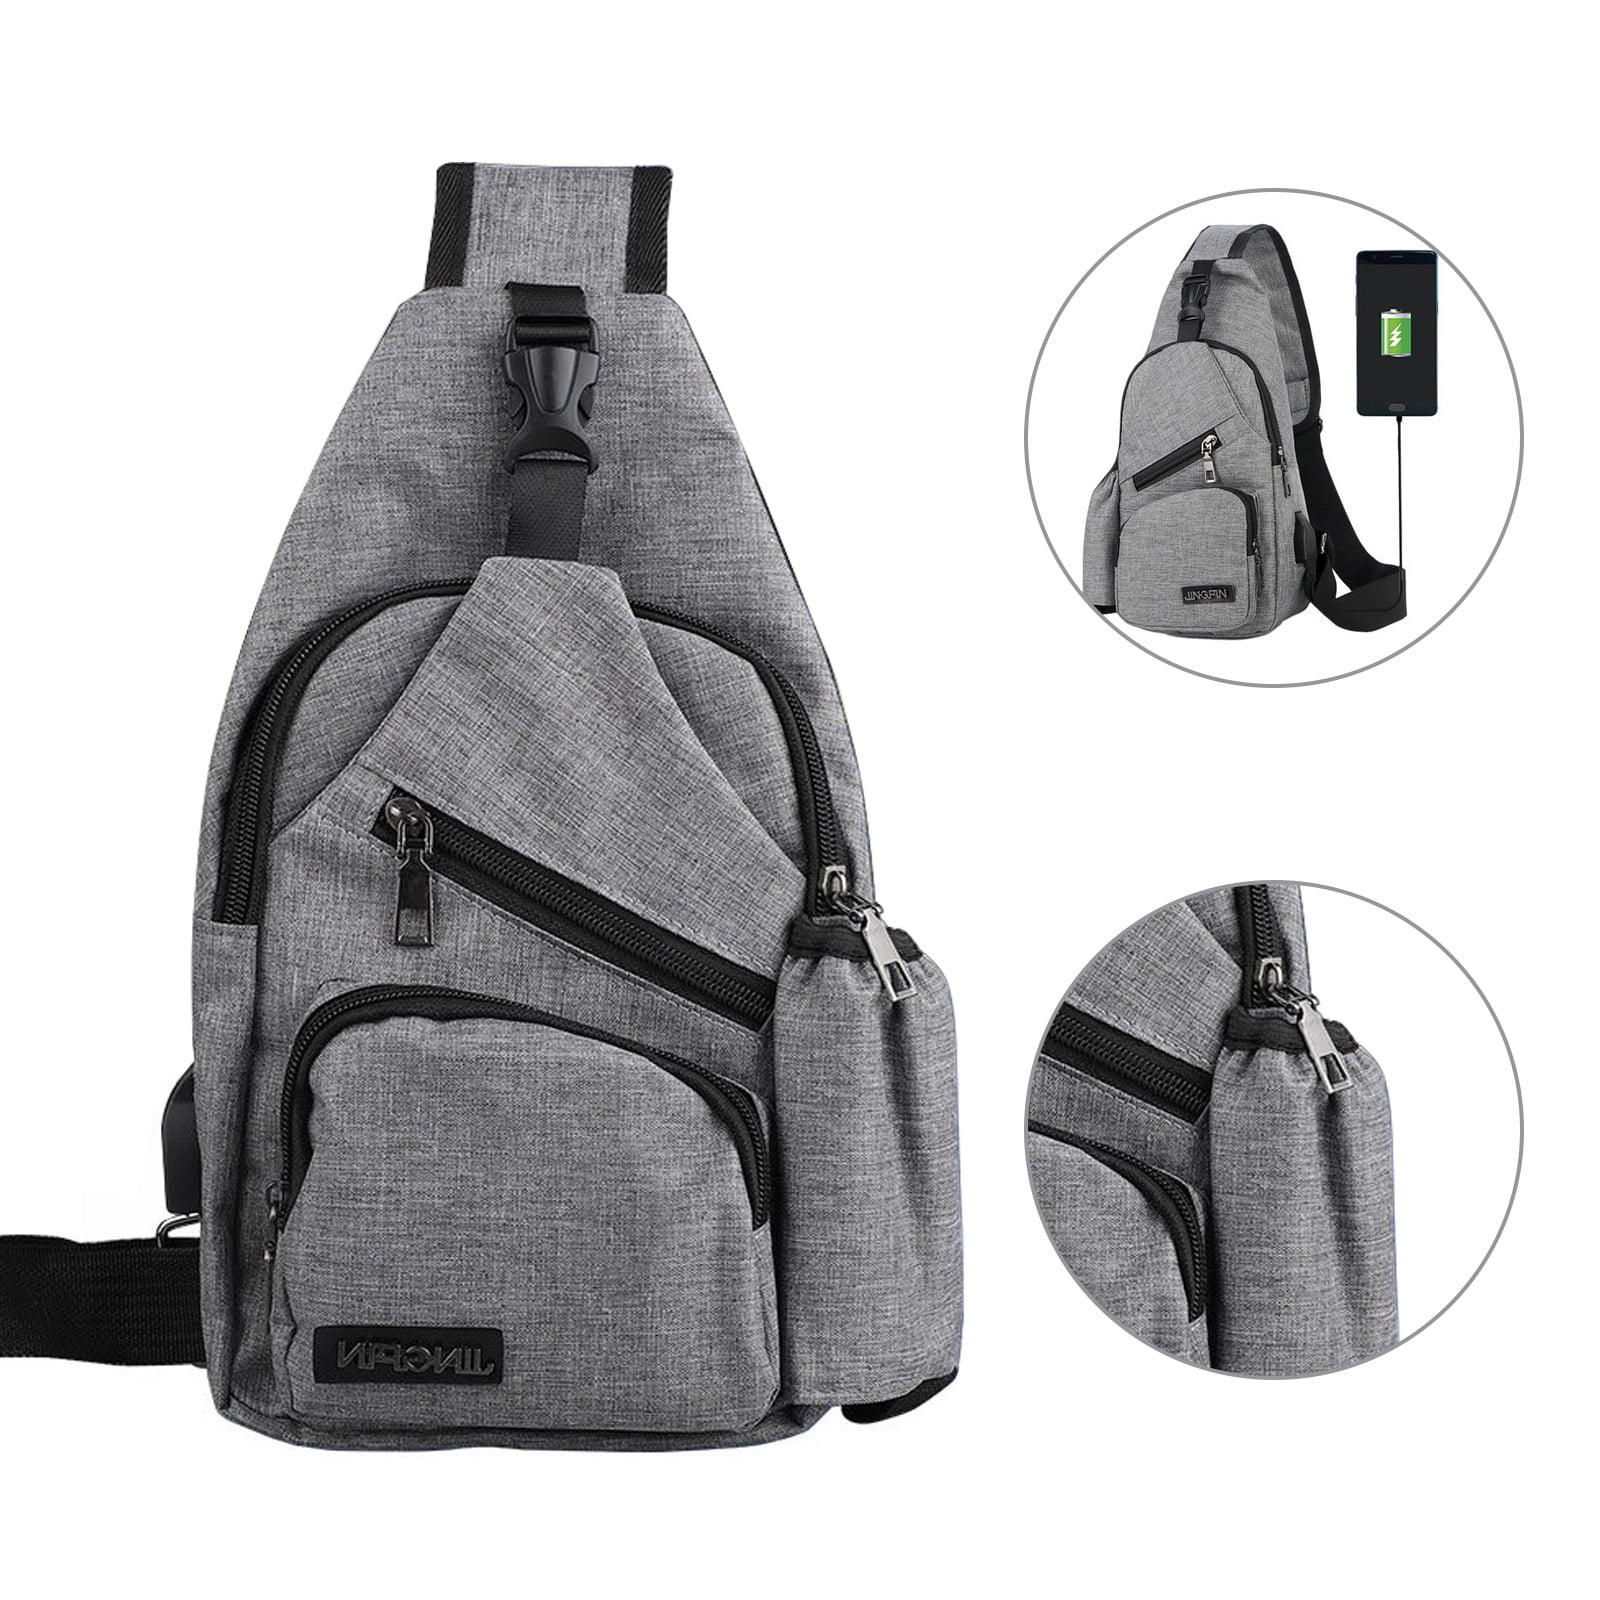 Casual Durable Backpack Daypacks for Men Women for Work Office College Students Business Travel Schoolbag Bookbag Triangles On Beige Background Travel Laptop Backpack 